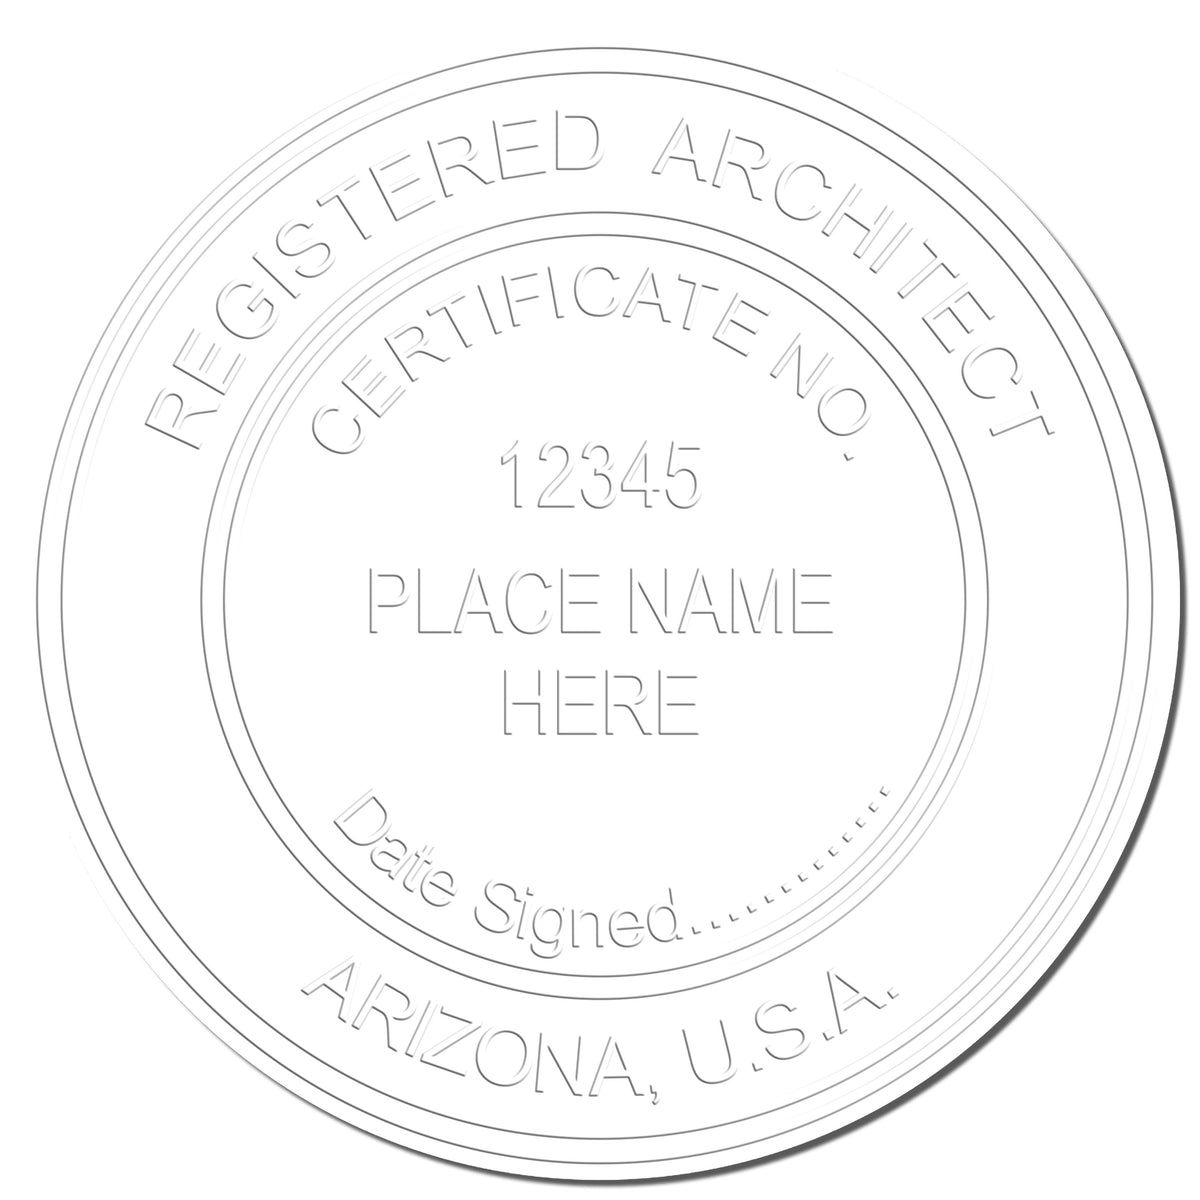 This paper is stamped with a sample imprint of the Gift Arizona Architect Seal, signifying its quality and reliability.